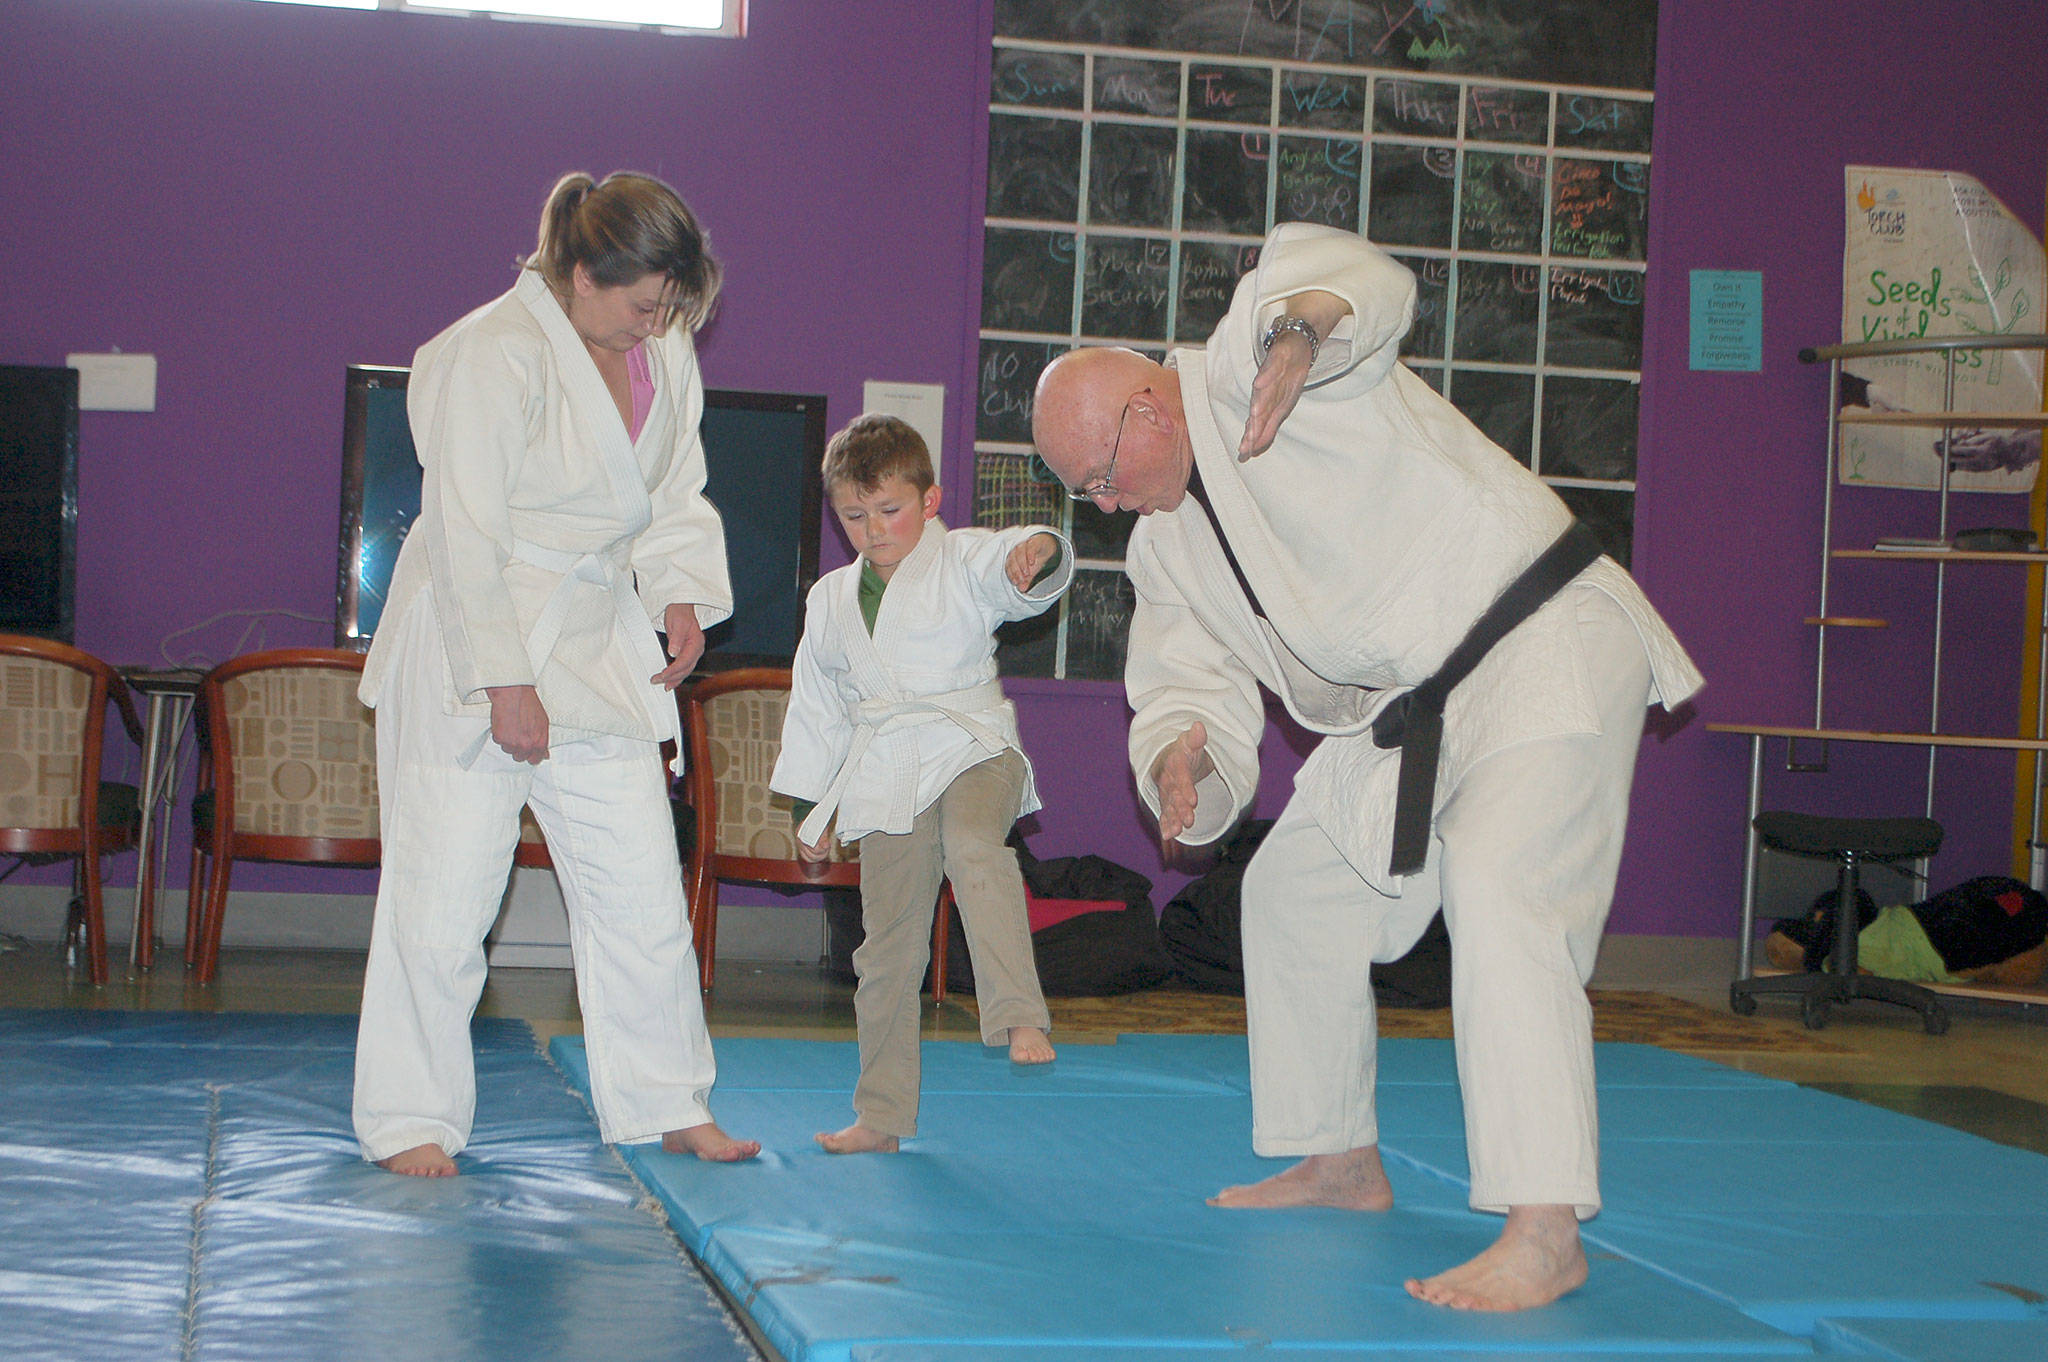 Judo instructors work with club member Olyver Van Selus during a judo class at the Boys & Girls Club Carroll C. Kendall unit in Sequim. Sequim Gazette photo by Erin Hawkins